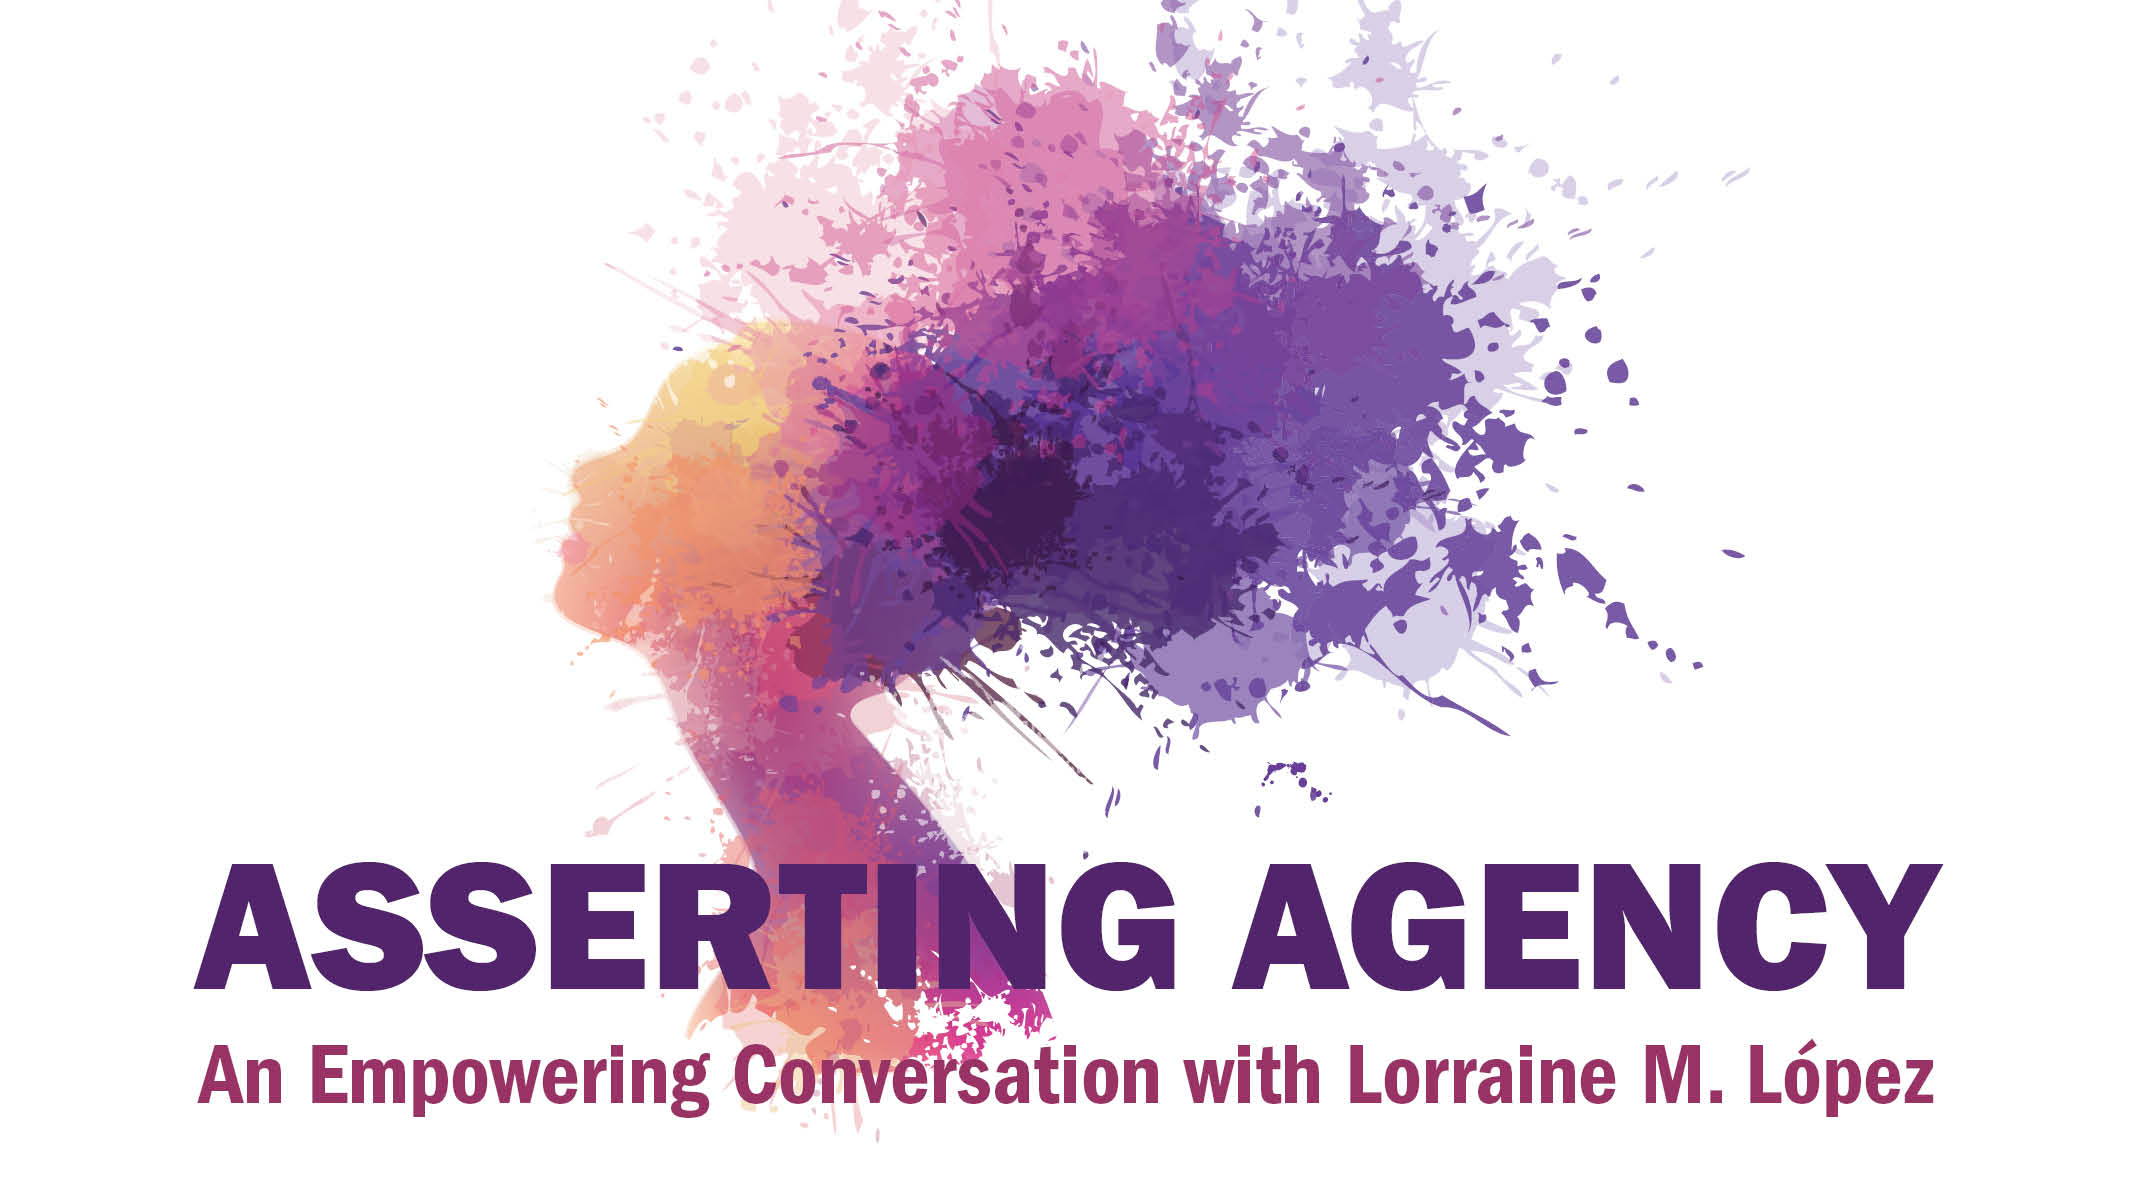 Asserting Agency: An Empowering Conversation with Lorraine M. Lopez